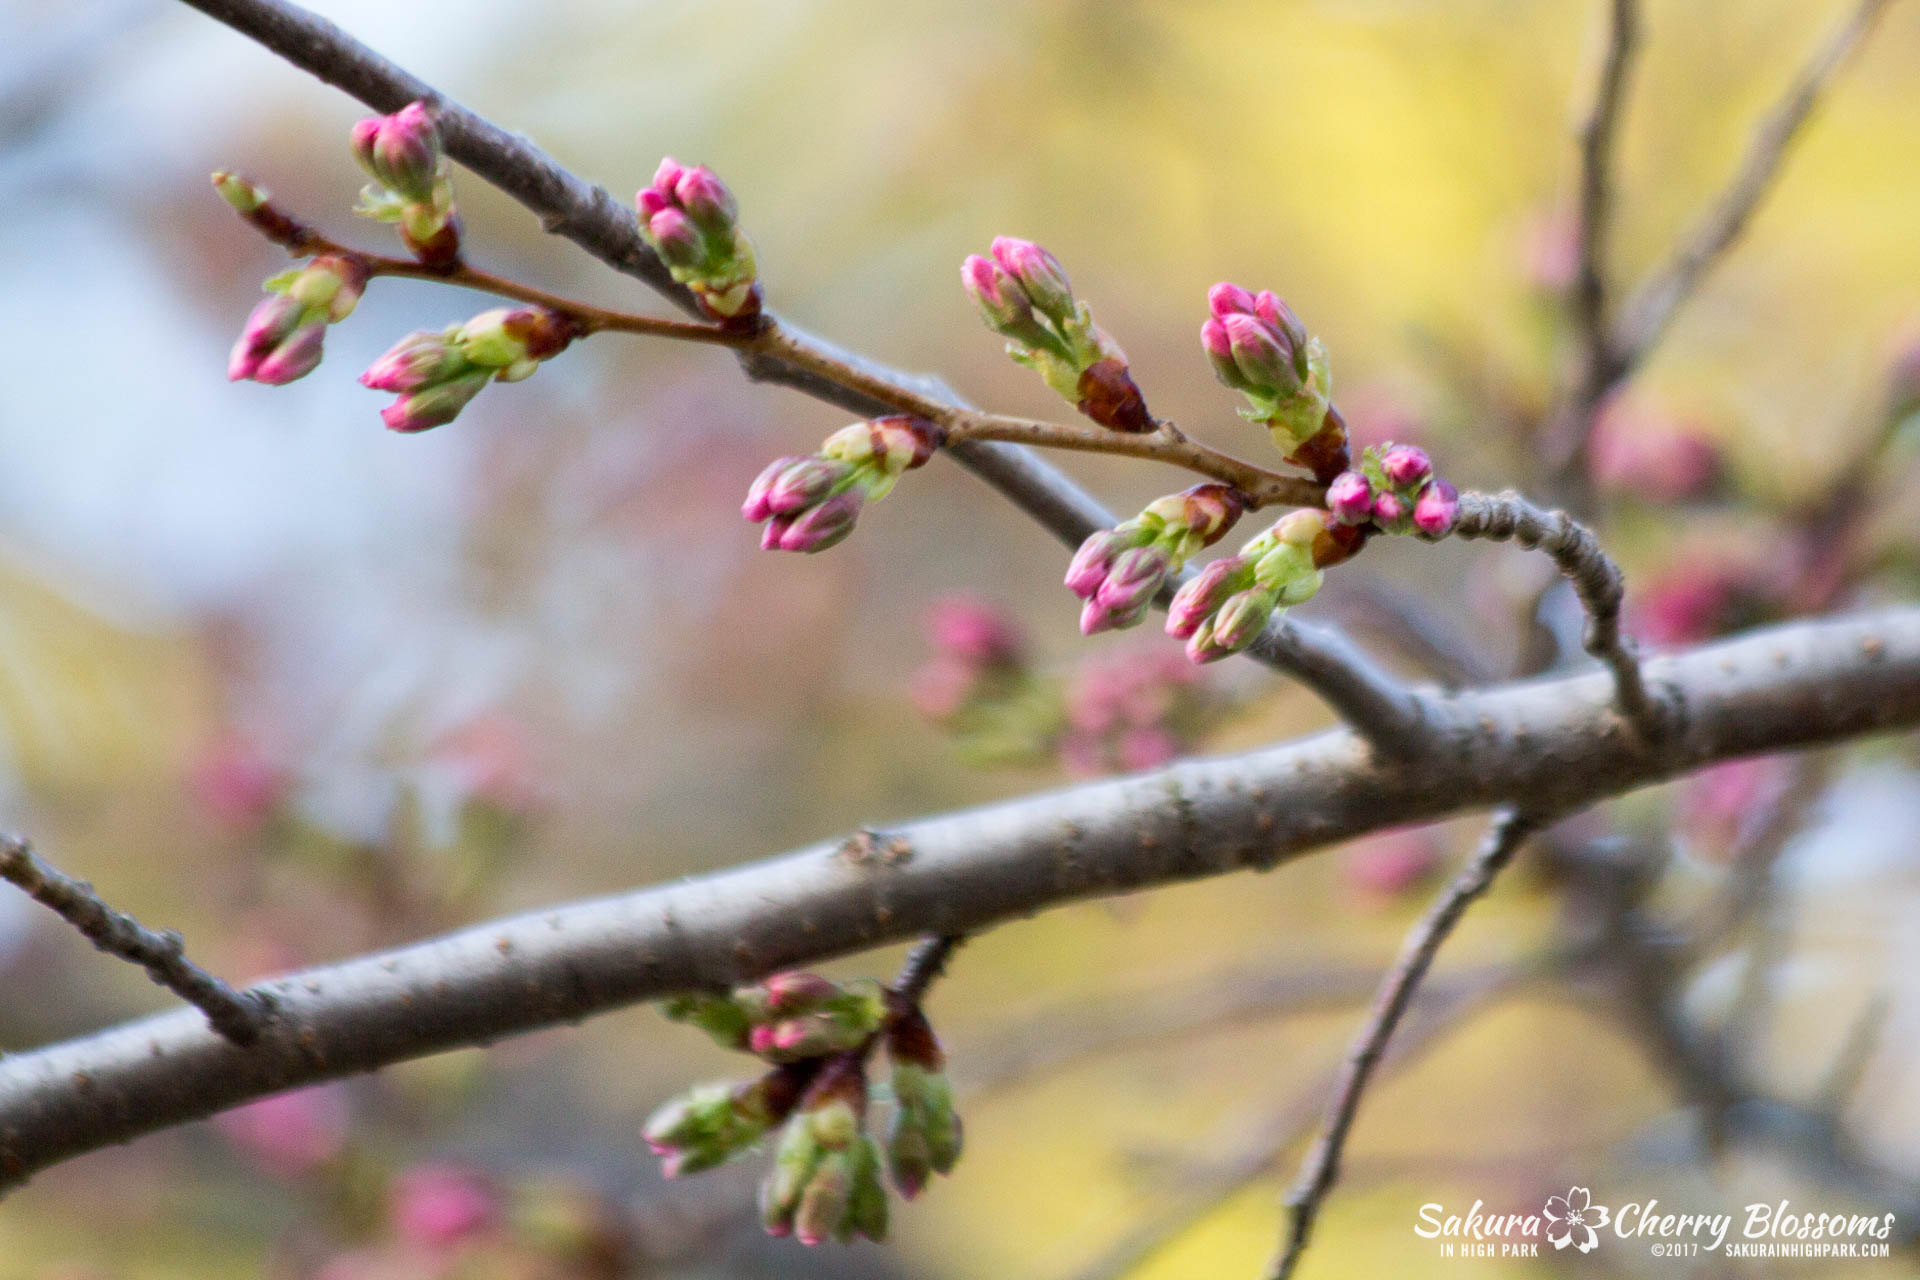 Sakura-in-High-Park-April-17-2017-florets-are-emerging-from-the-buds-throughout-the-park-110.jpg